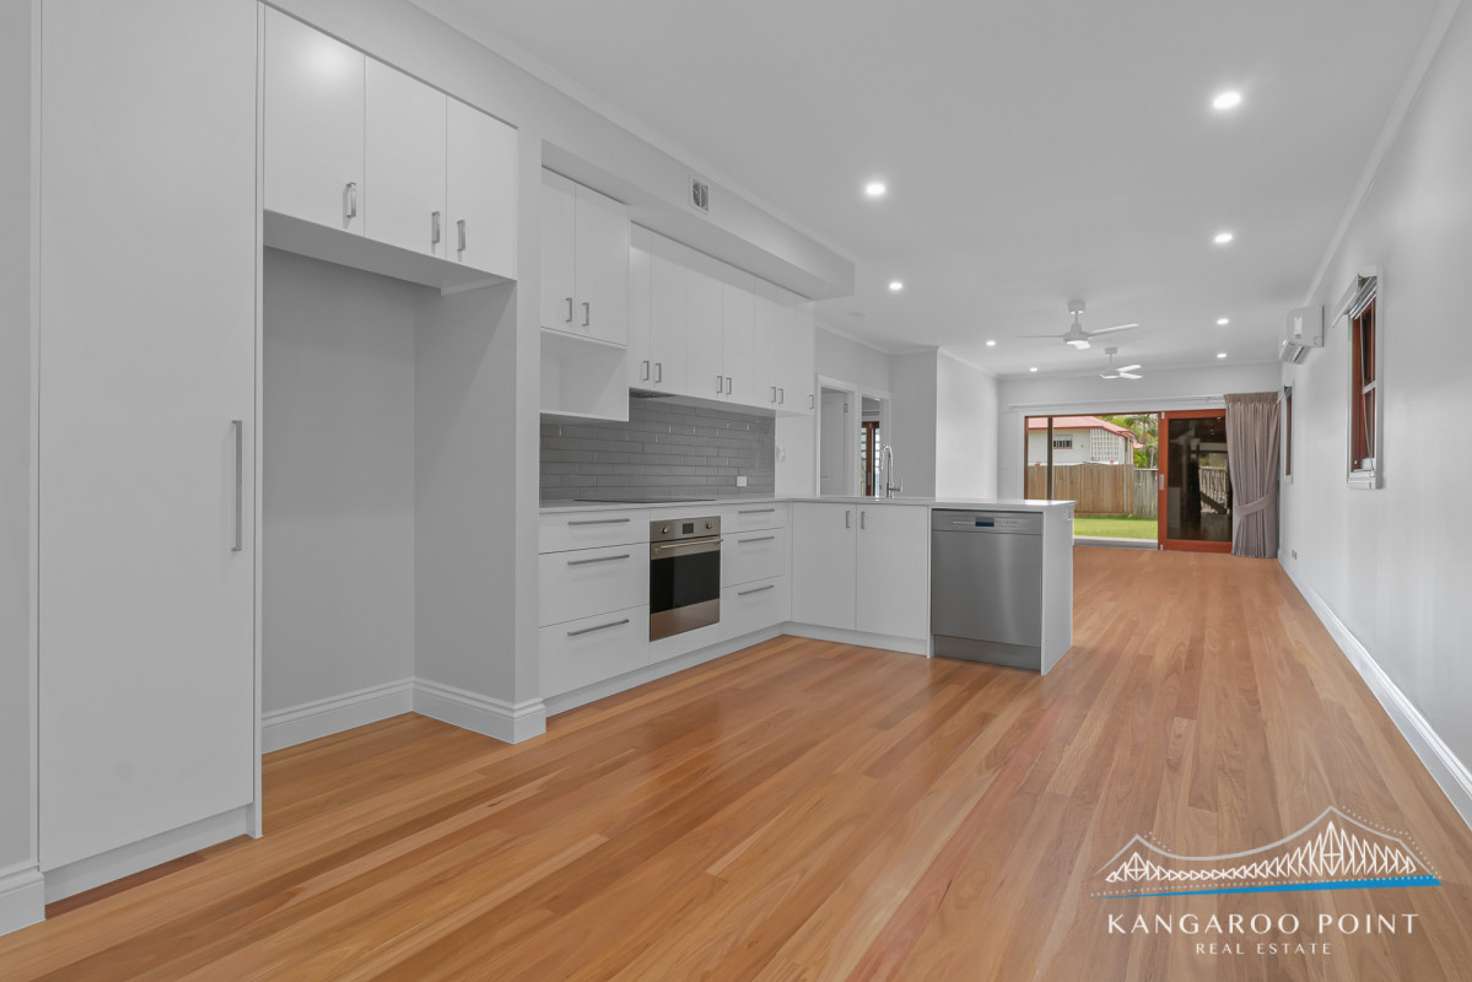 Main view of Homely apartment listing, 21 Rosina Street, Kangaroo Point QLD 4169